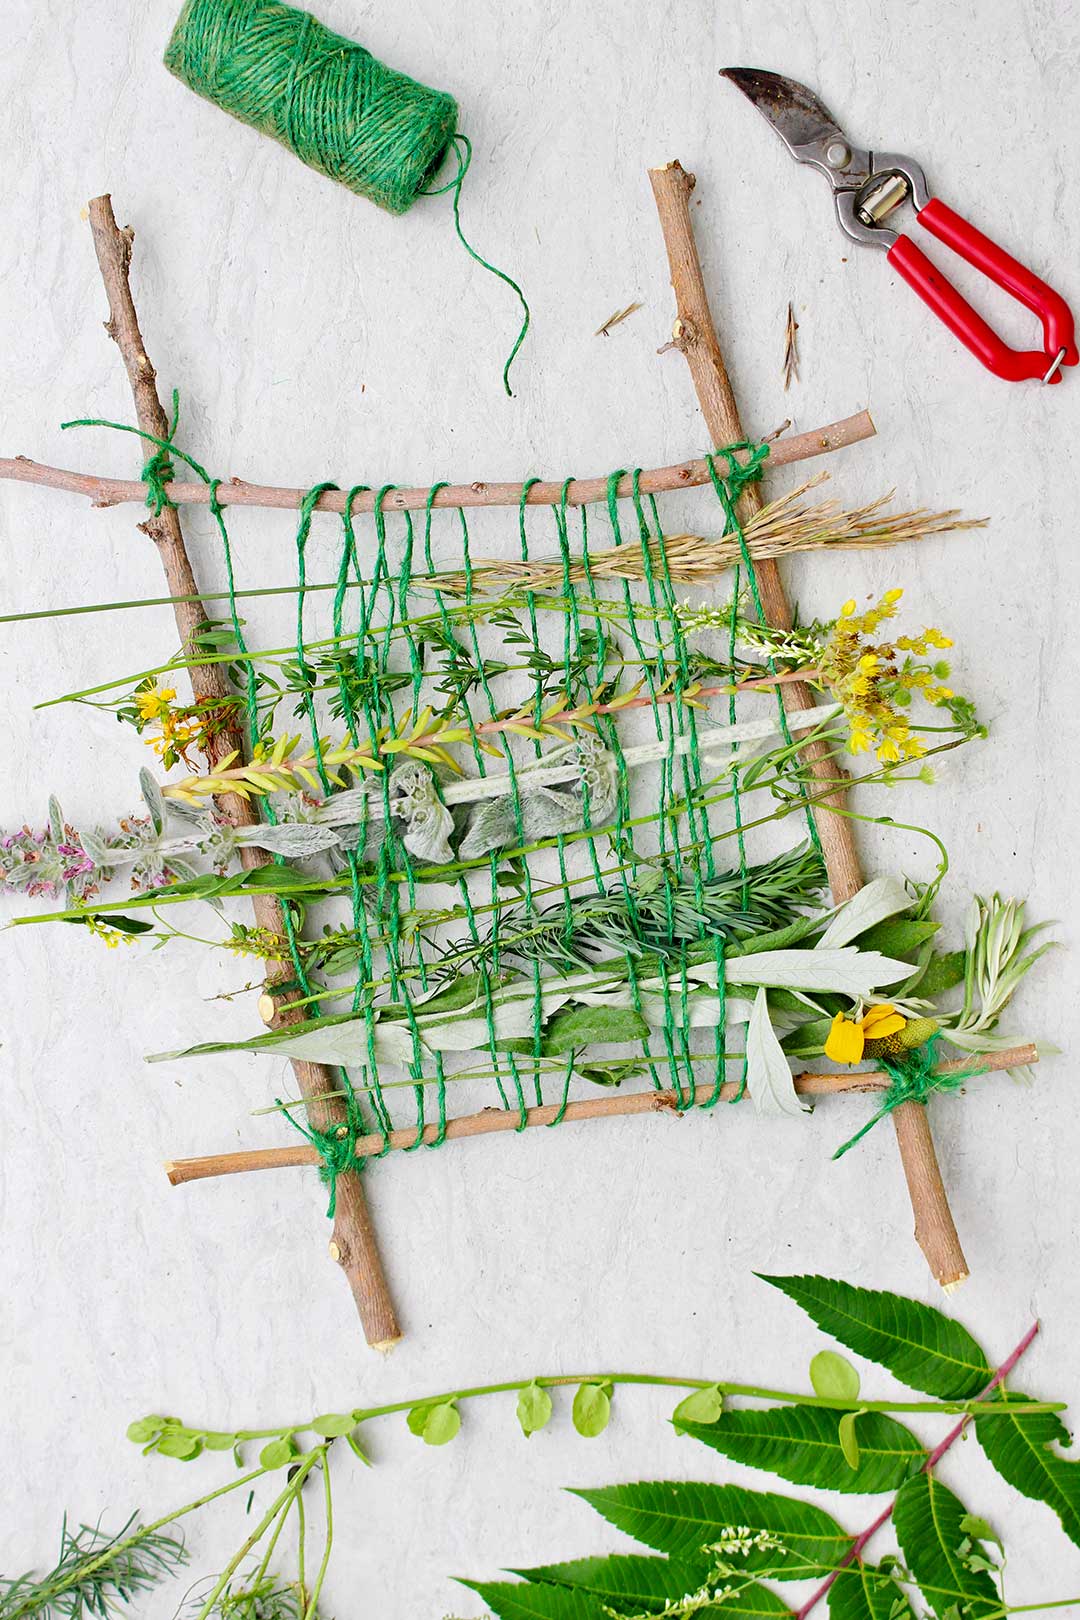 Completed nature weave using flowers and springs of various greenery on a twig loom with green string.